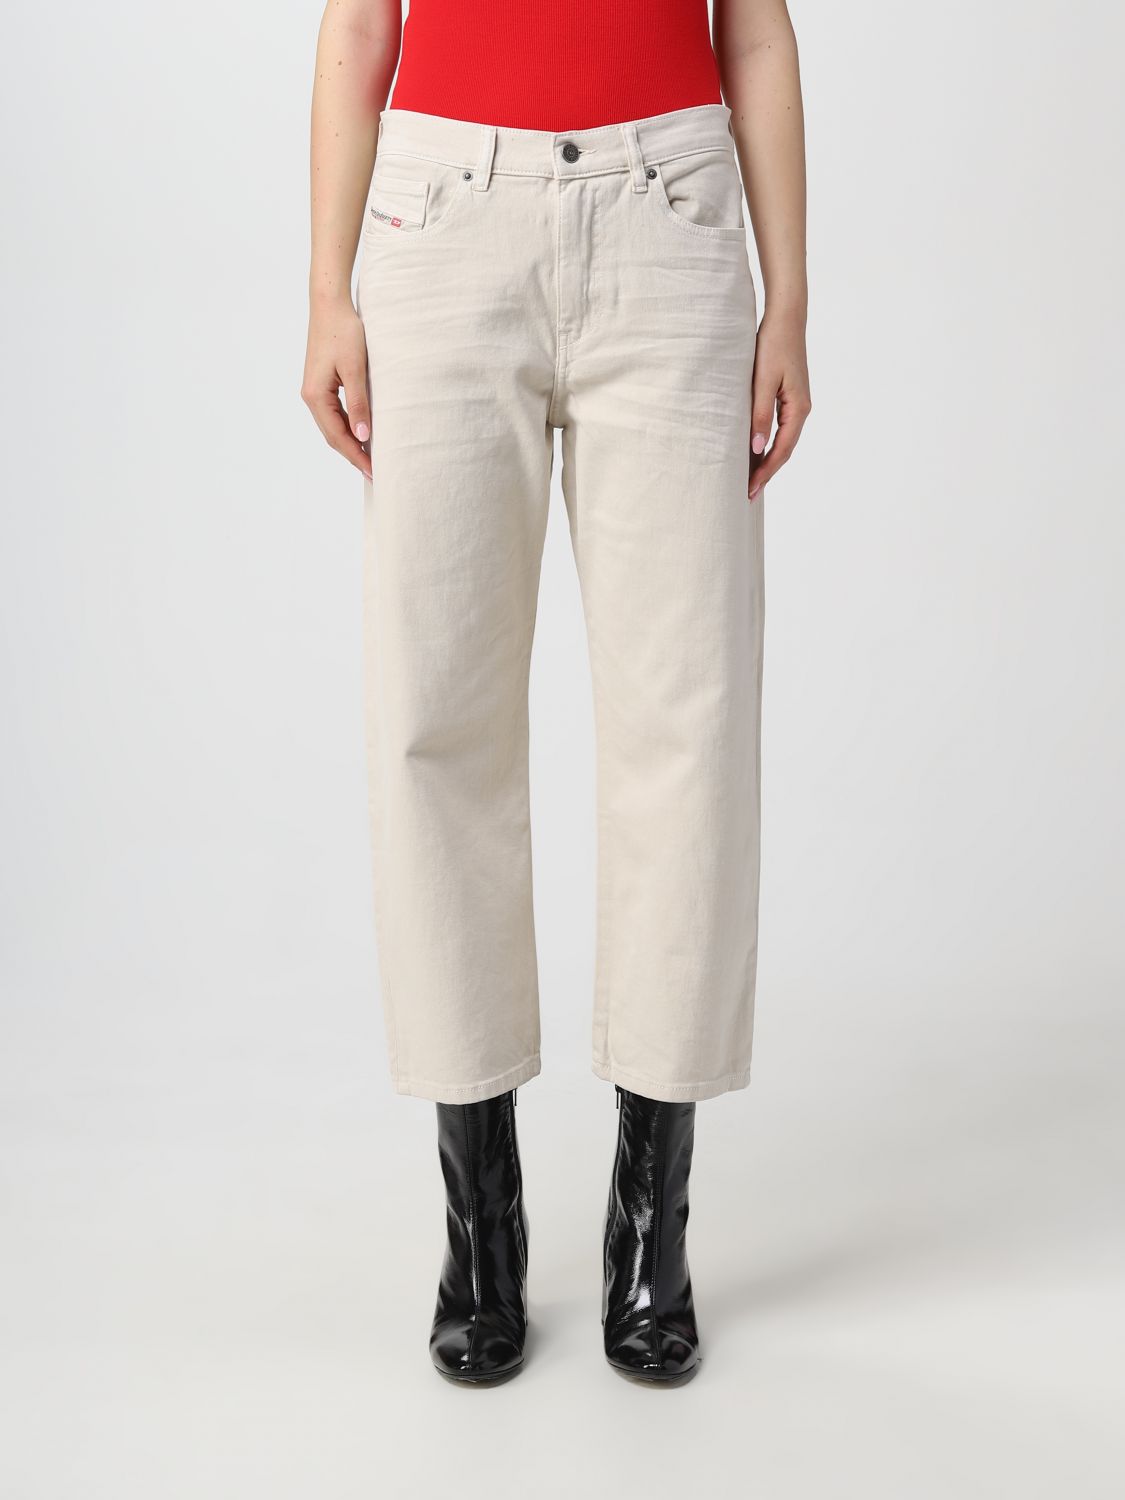 DIESEL: pants for woman - White | Diesel pants A036190QWTY online on ...